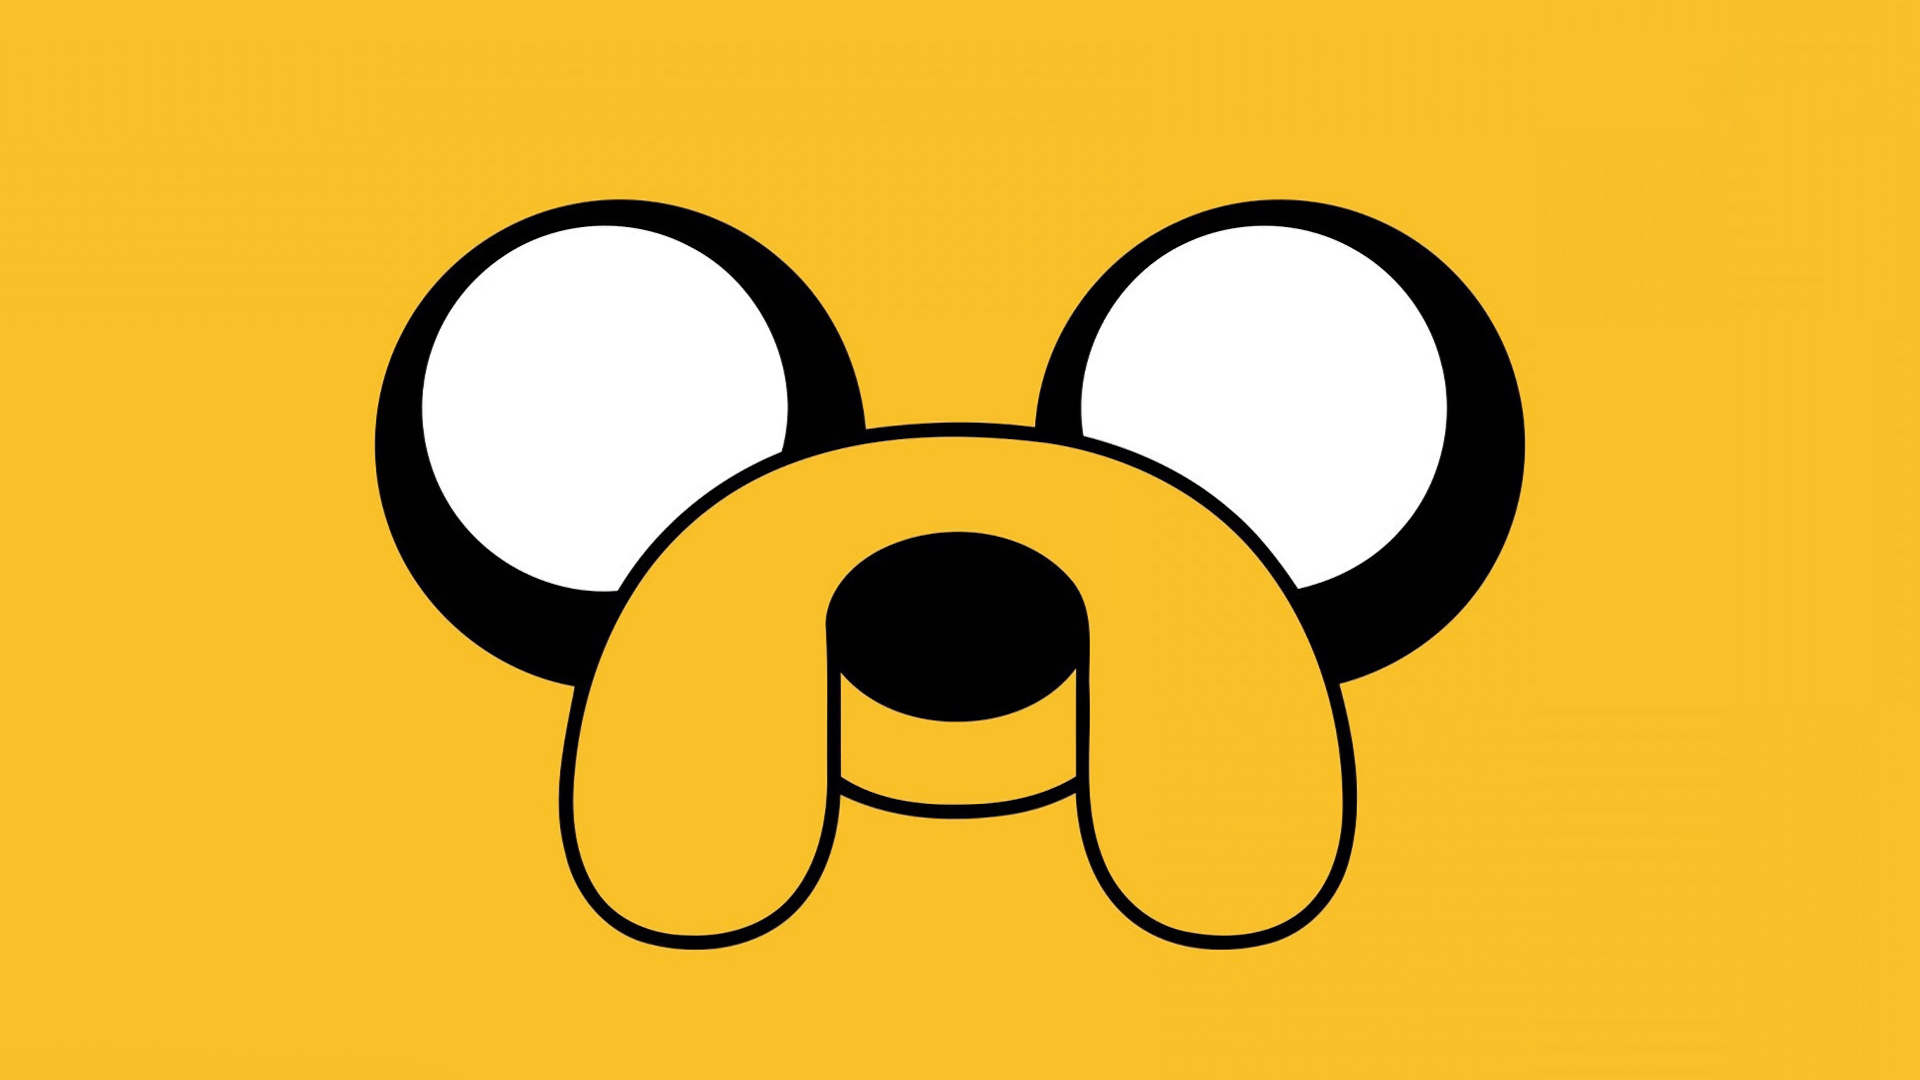 Adventure Time Jake the Dog wallpaper 1920x1080 - Adventure Time